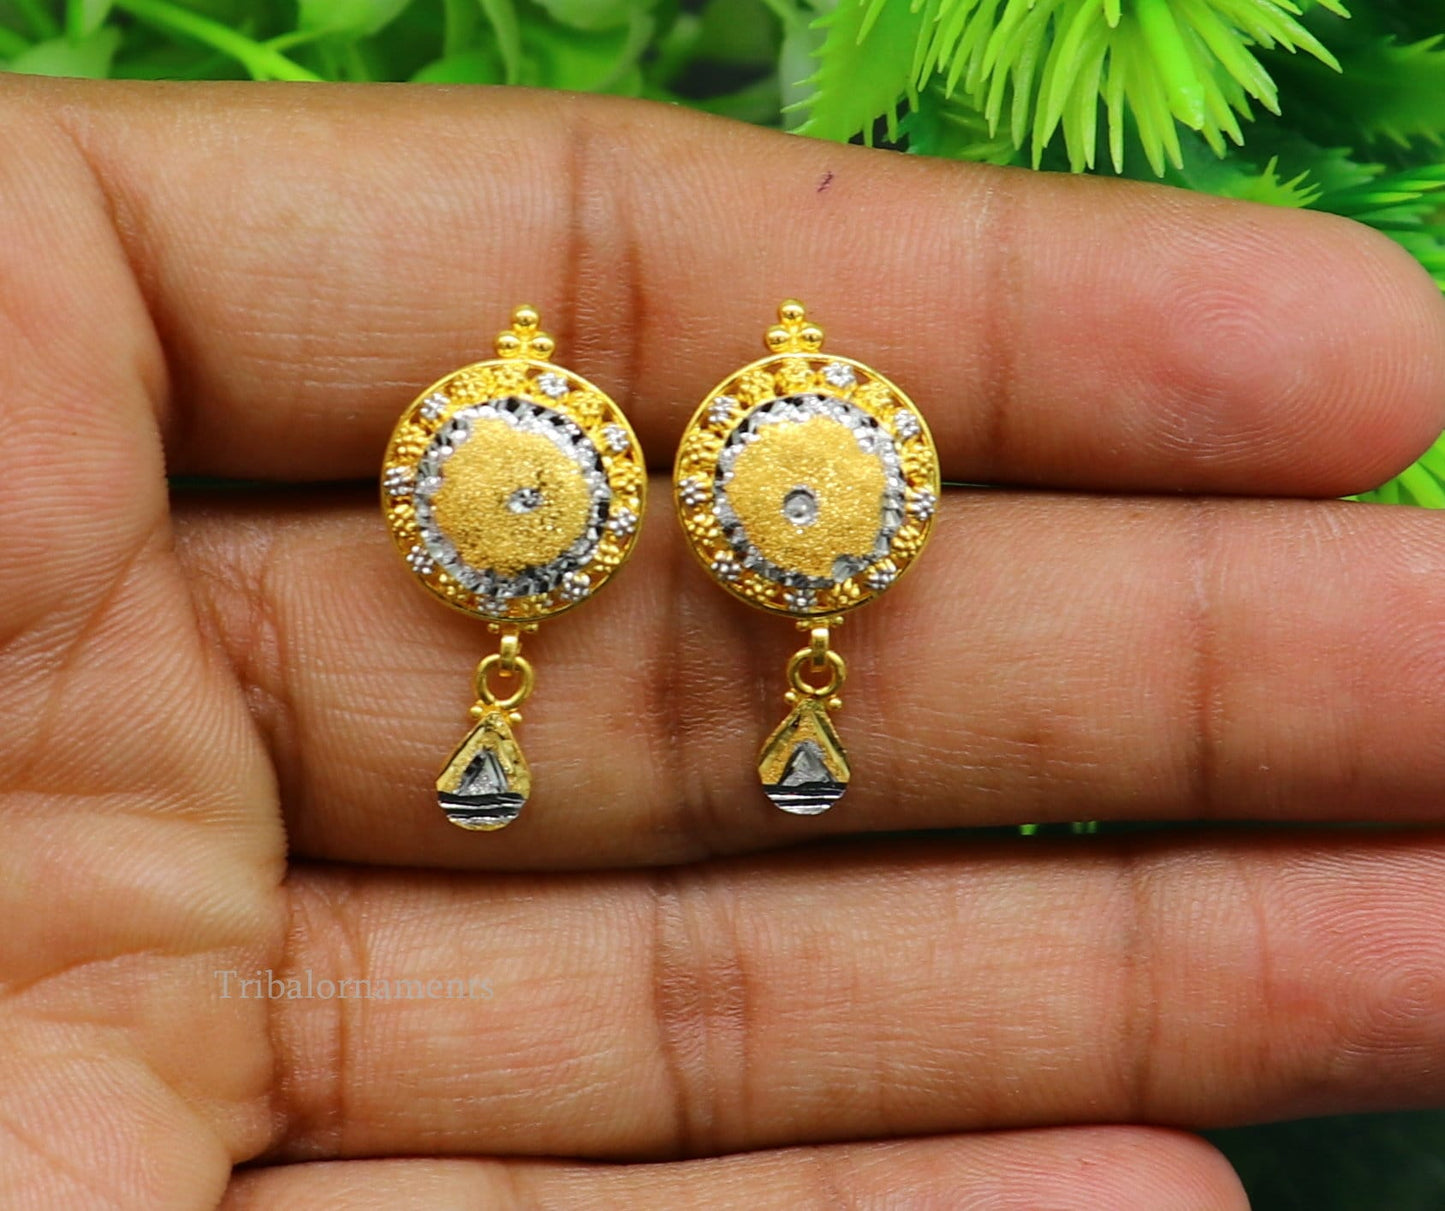 22Kt yellow gold handmade Stylish designer fancy earring, gorgeous brides gift daily use best gifting stud earring, charm jewelry ear129 - TRIBAL ORNAMENTS